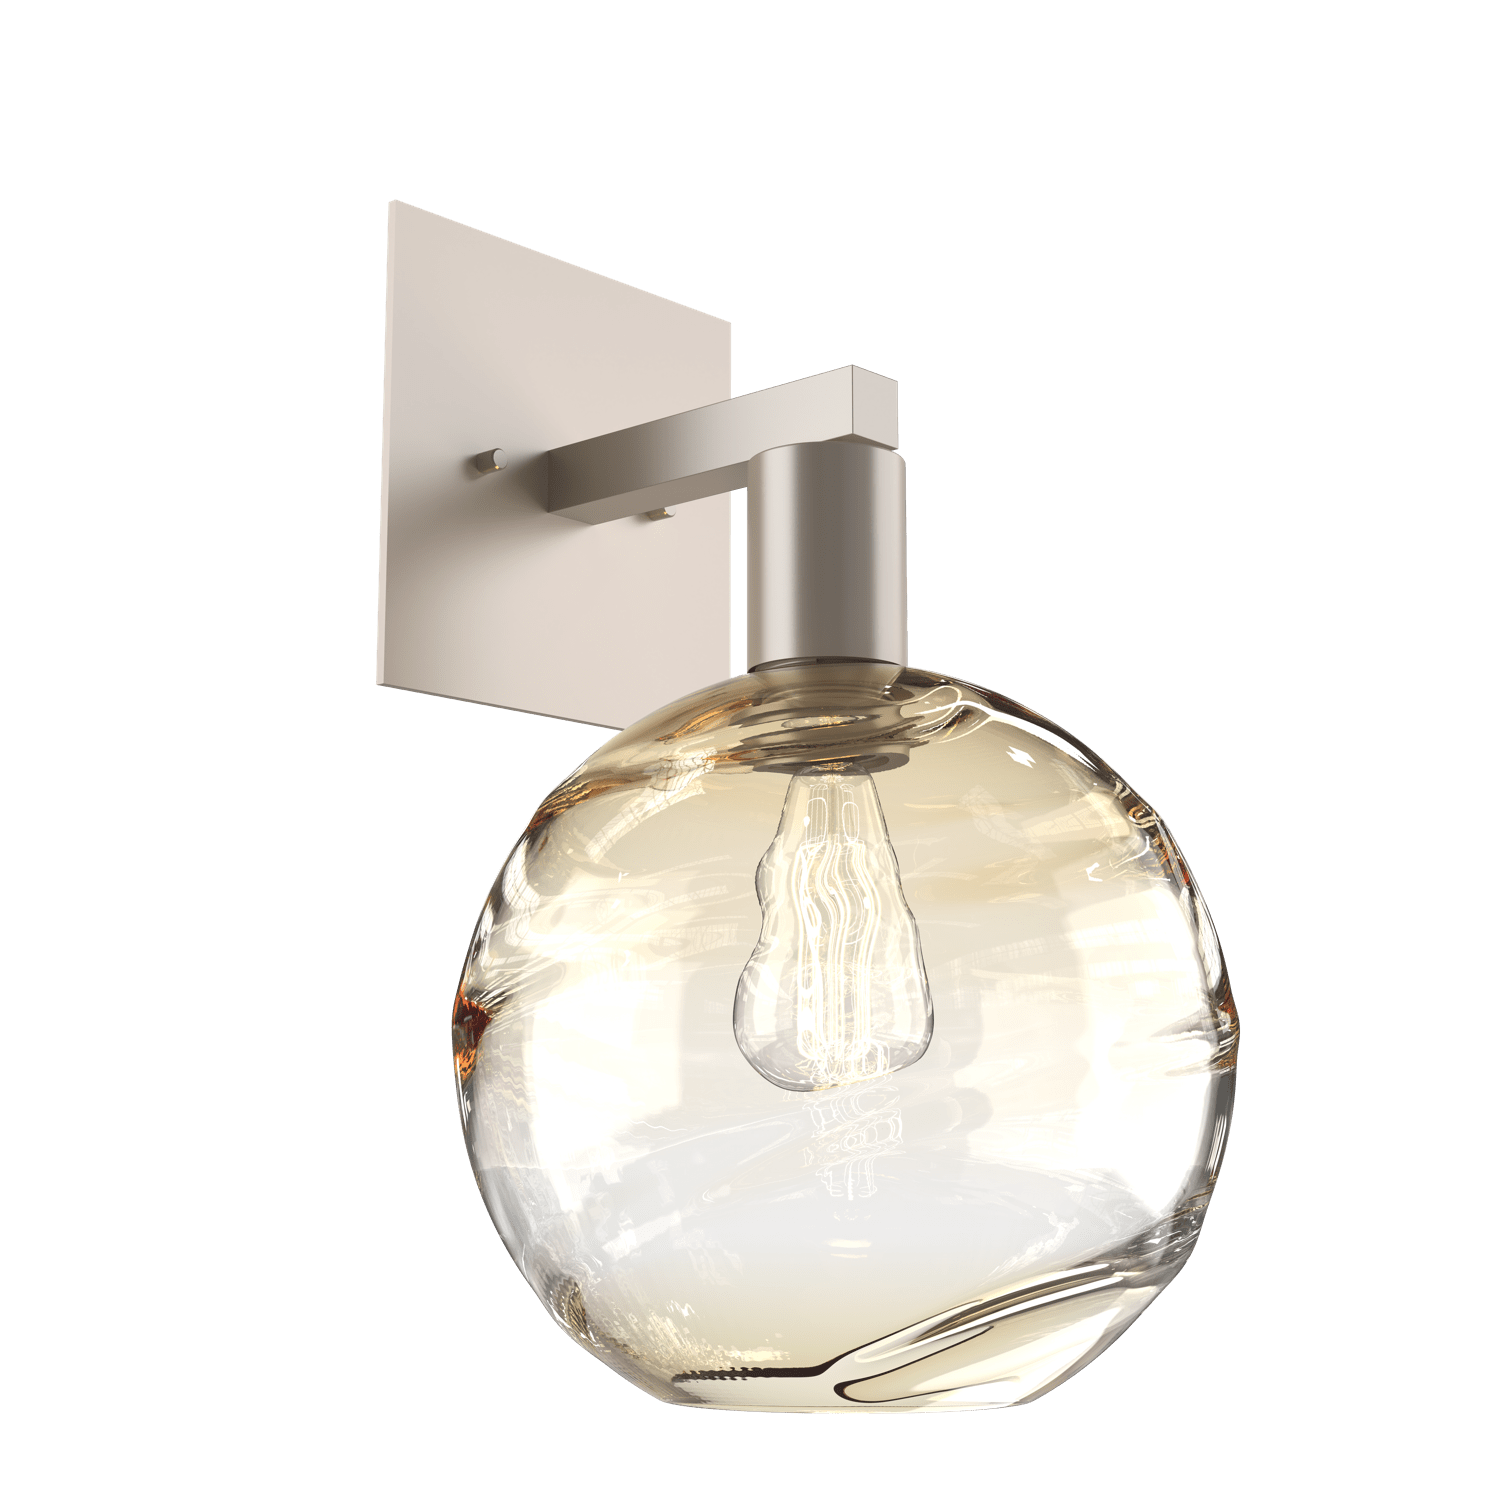 IDB0047-14-BS-OA-Hammerton-Studio-Optic-Blown-Glass-Terra-wall-sconce-with-metallic-beige-silver-finish-and-optic-amber-blown-glass-shades-and-incandescent-lamping